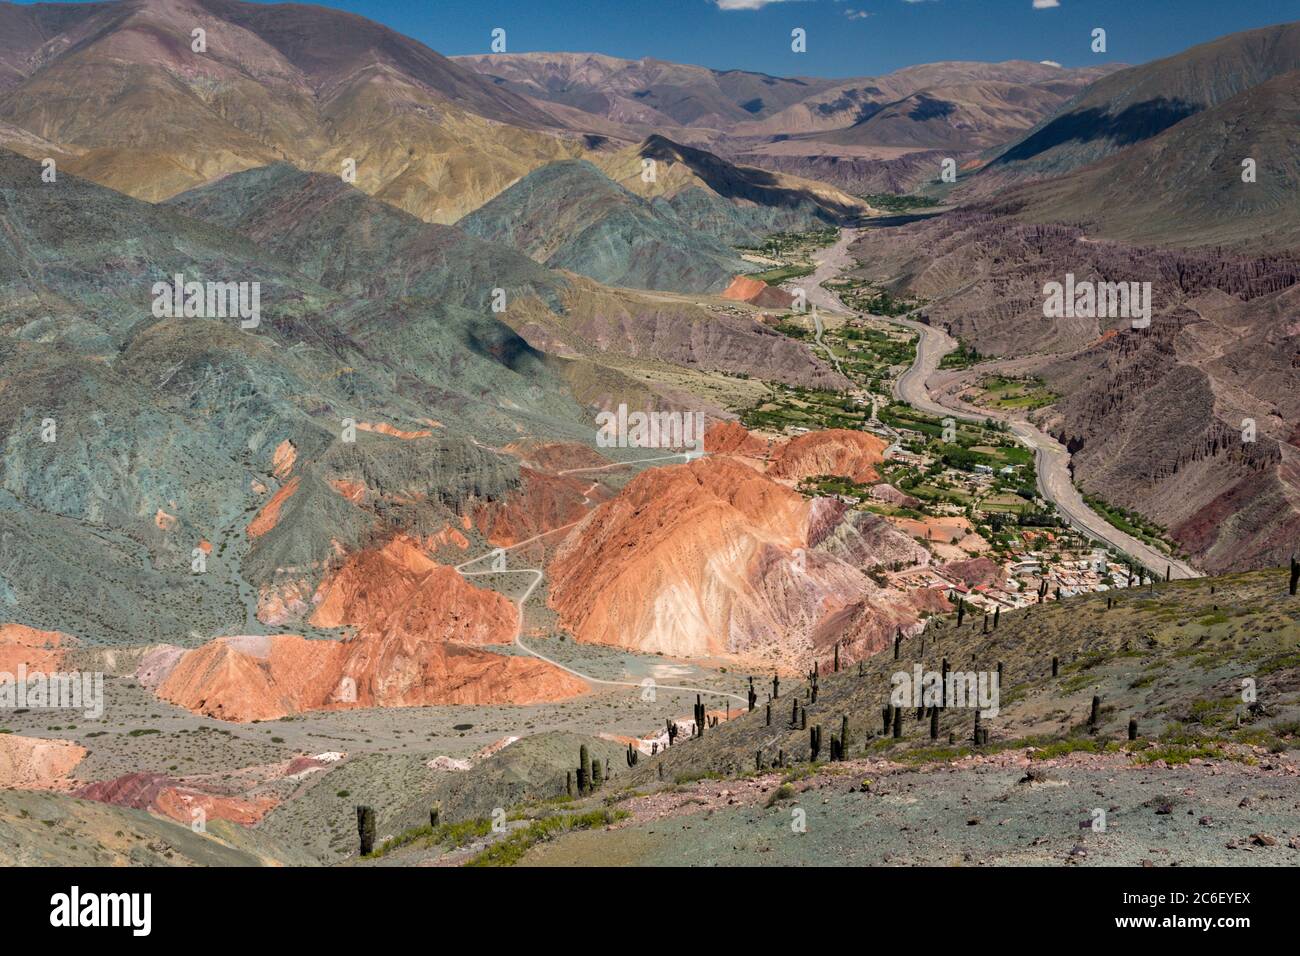 View of the Cerro de los Siete Colores (mountain of the seven colours) in Purmamarca, Jujuy Province, Argentina Stock Photo